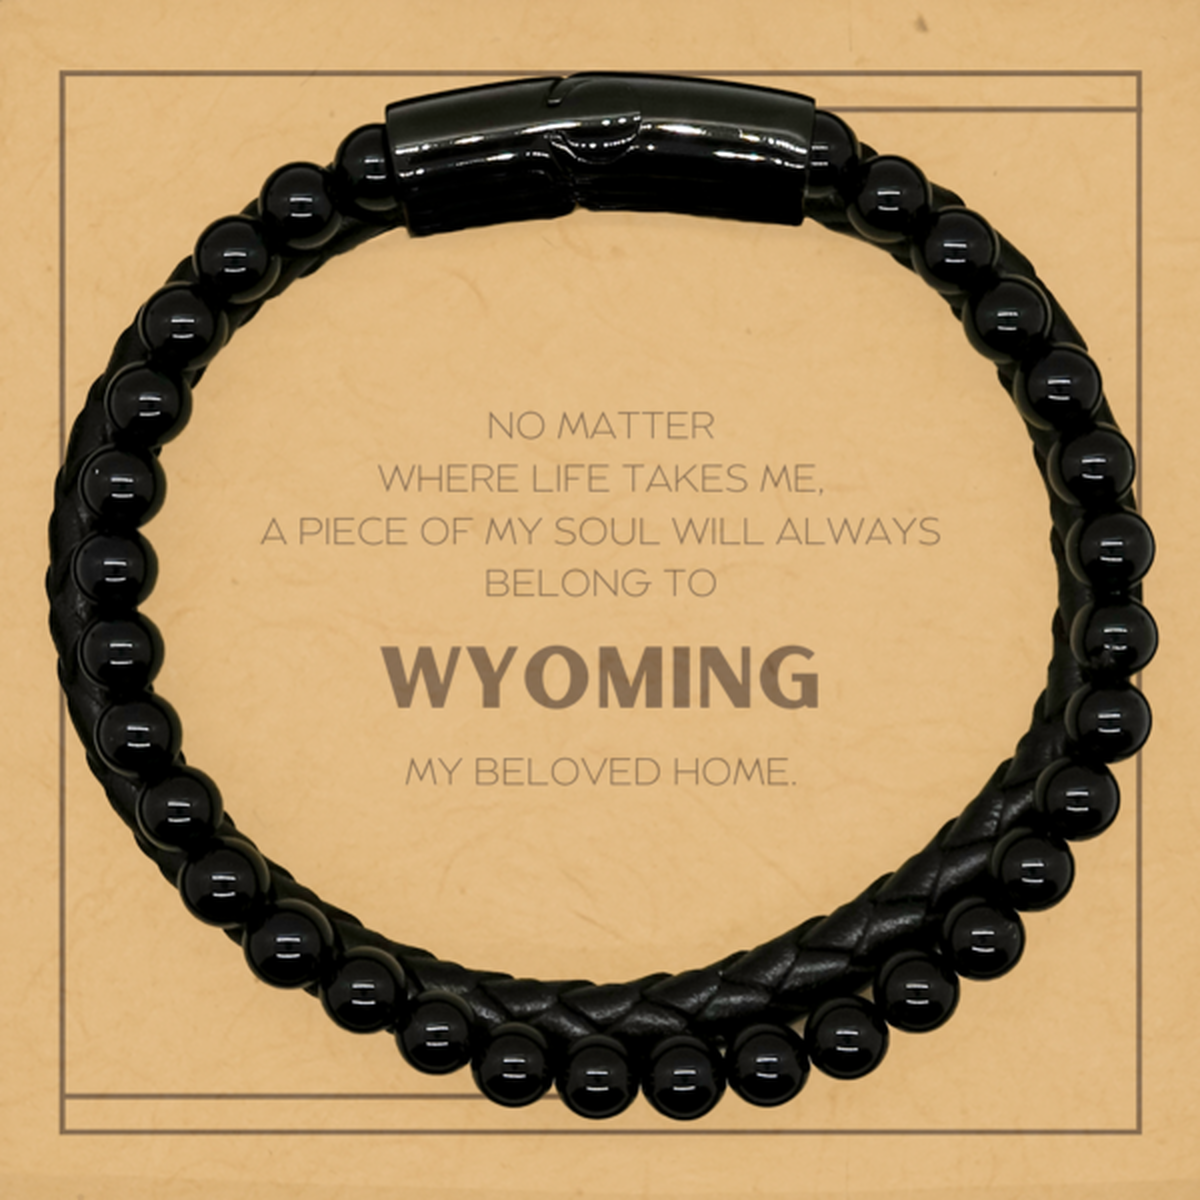 Love Wyoming State Gifts, My soul will always belong to Wyoming, Proud Stone Leather Bracelets, Birthday Unique Gifts For Wyoming Men, Women, Friends